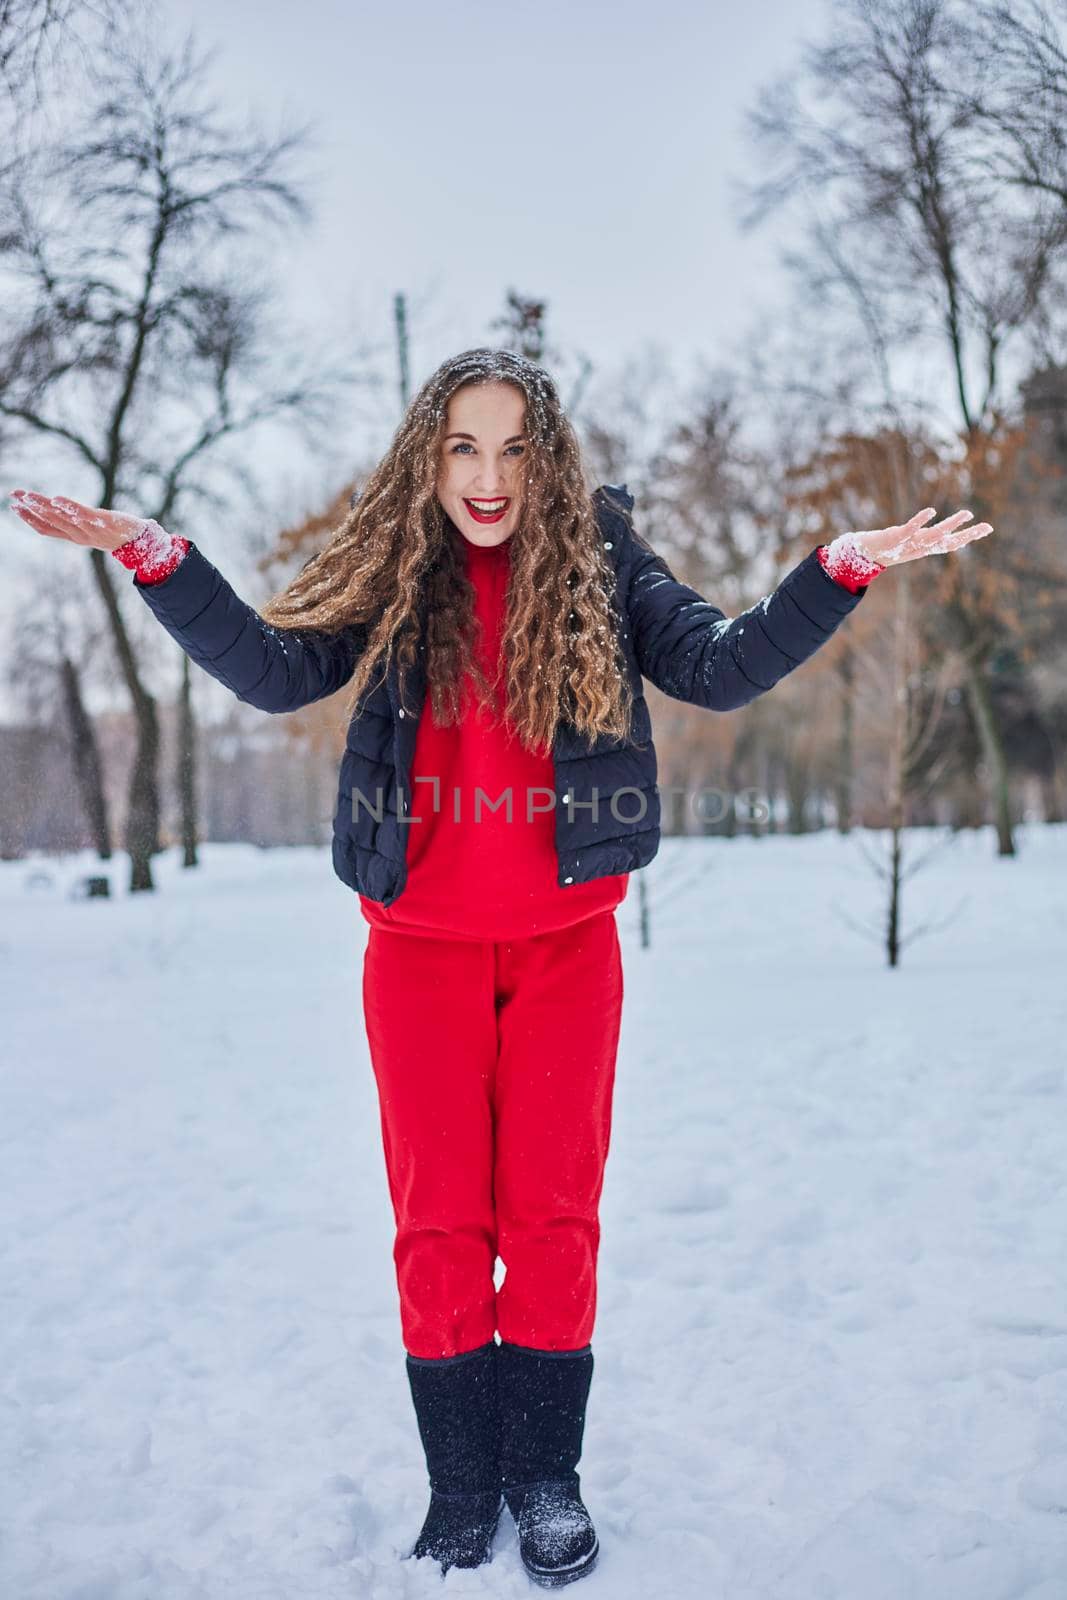 a young happy woman is having fun in a winter park, throwing snow, it is cold in her hands, the emissions are off scale. by mosfet_ua